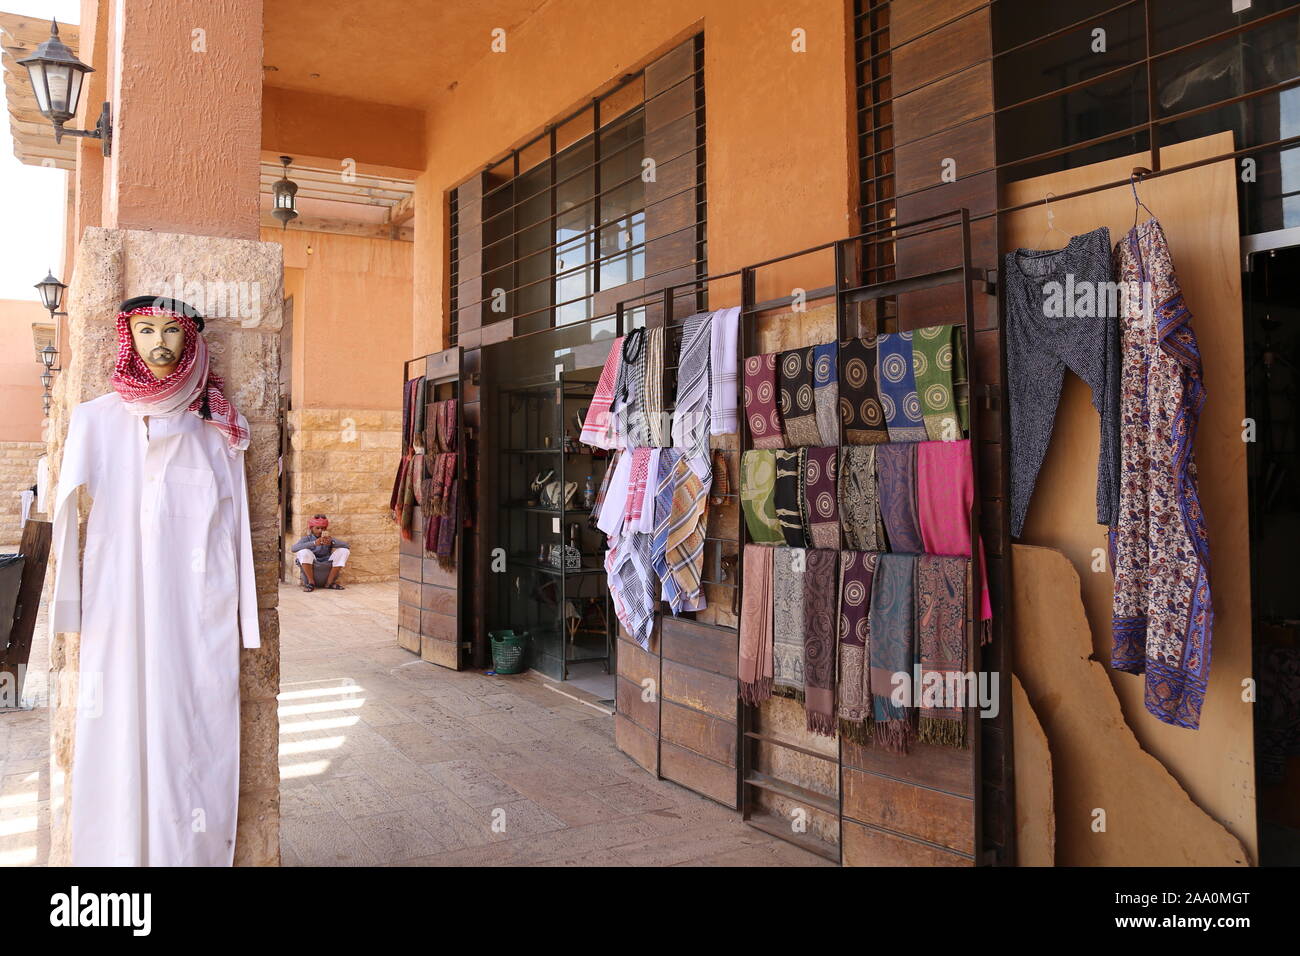 Visitor Centre shops, Wadi Rum Protected Area, Aqaba Governorate, Jordan, Middle East Stock Photo